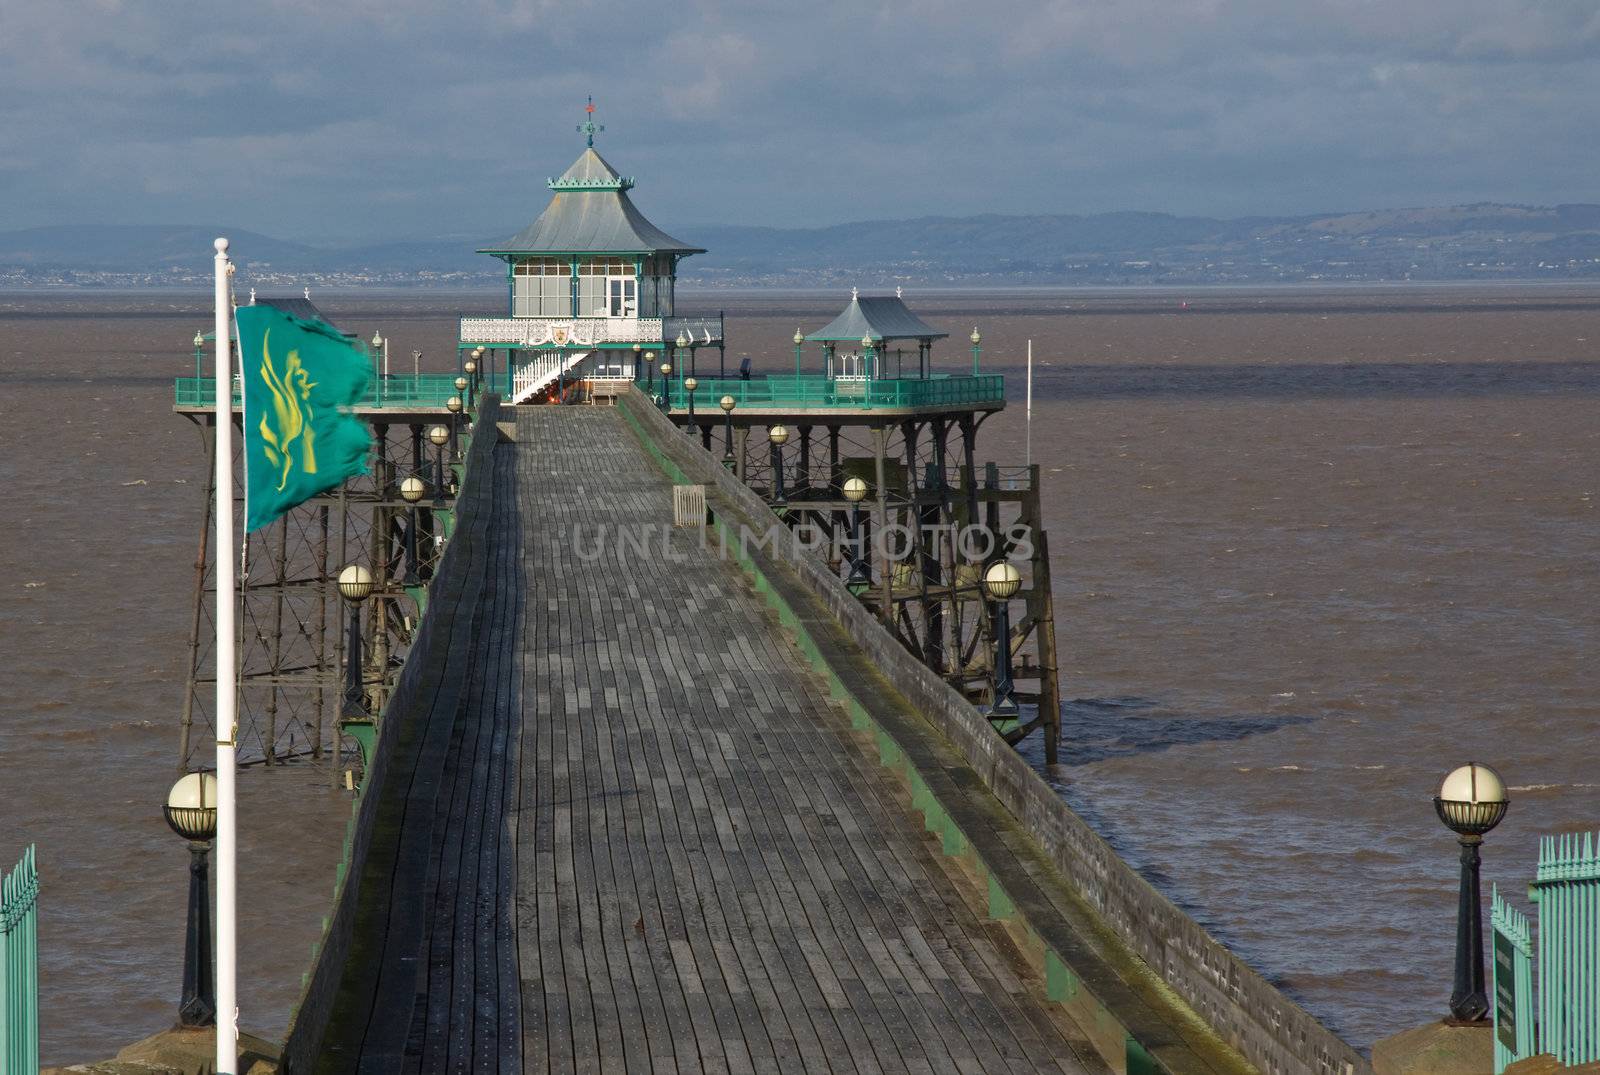 The walkway on Clevedon pier in the Bristol Channel